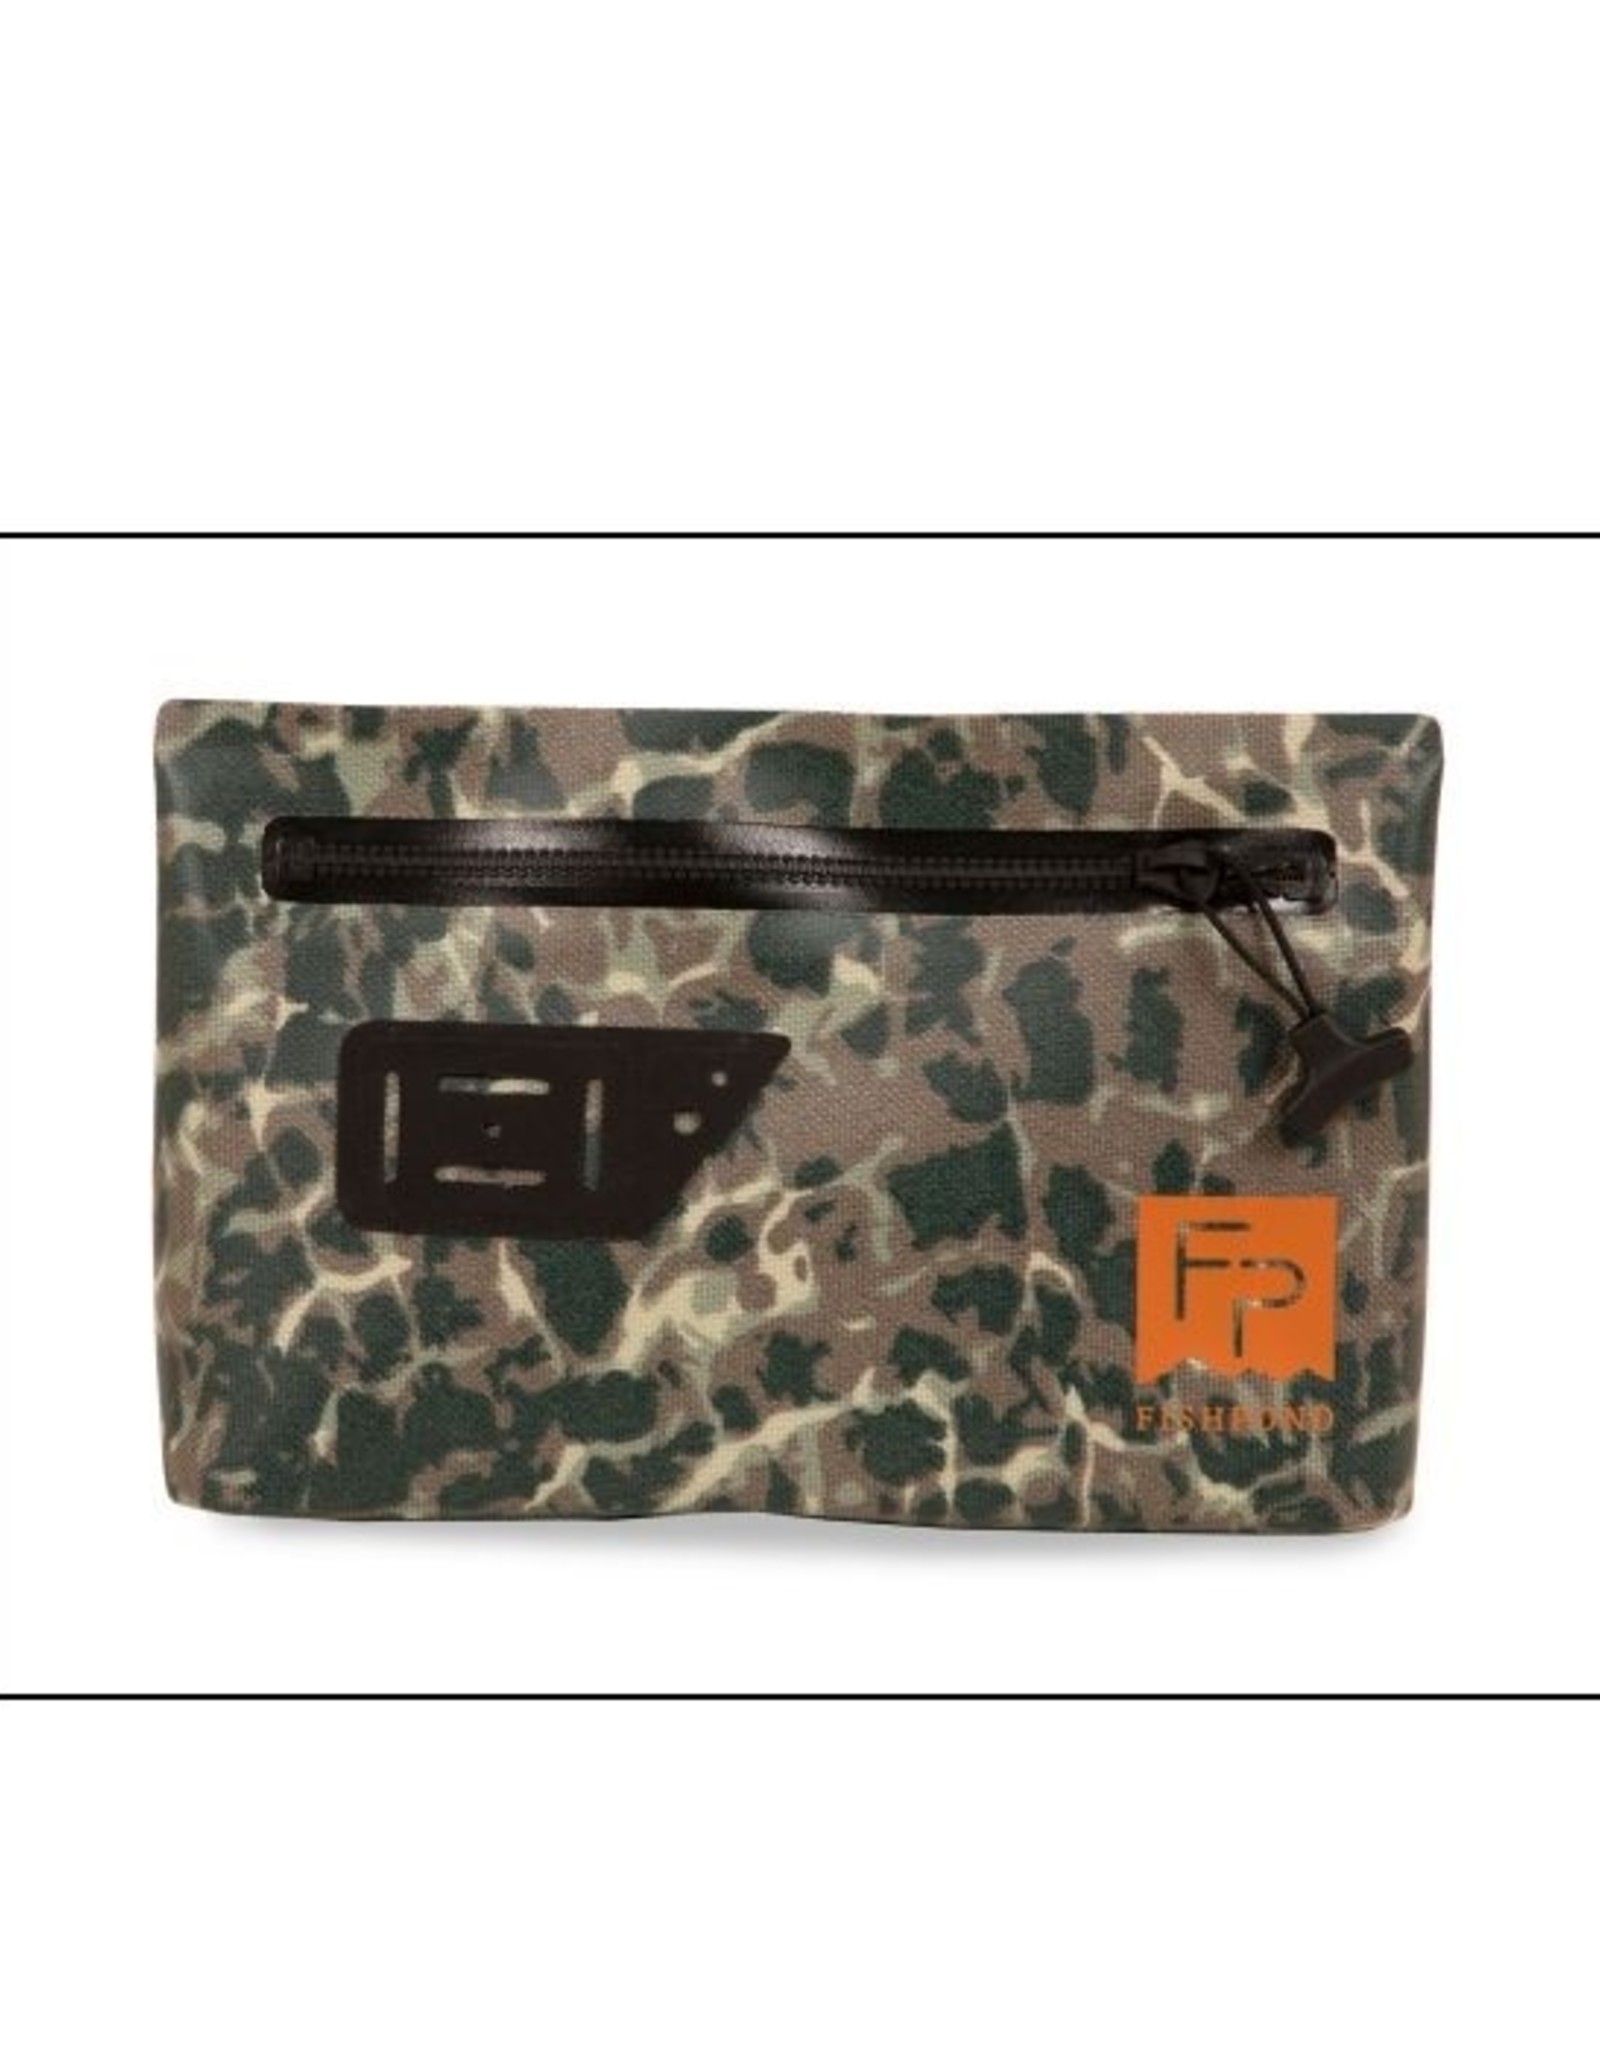 Fishpond THUNDERHEAD POUCH RIVERBED CAMO